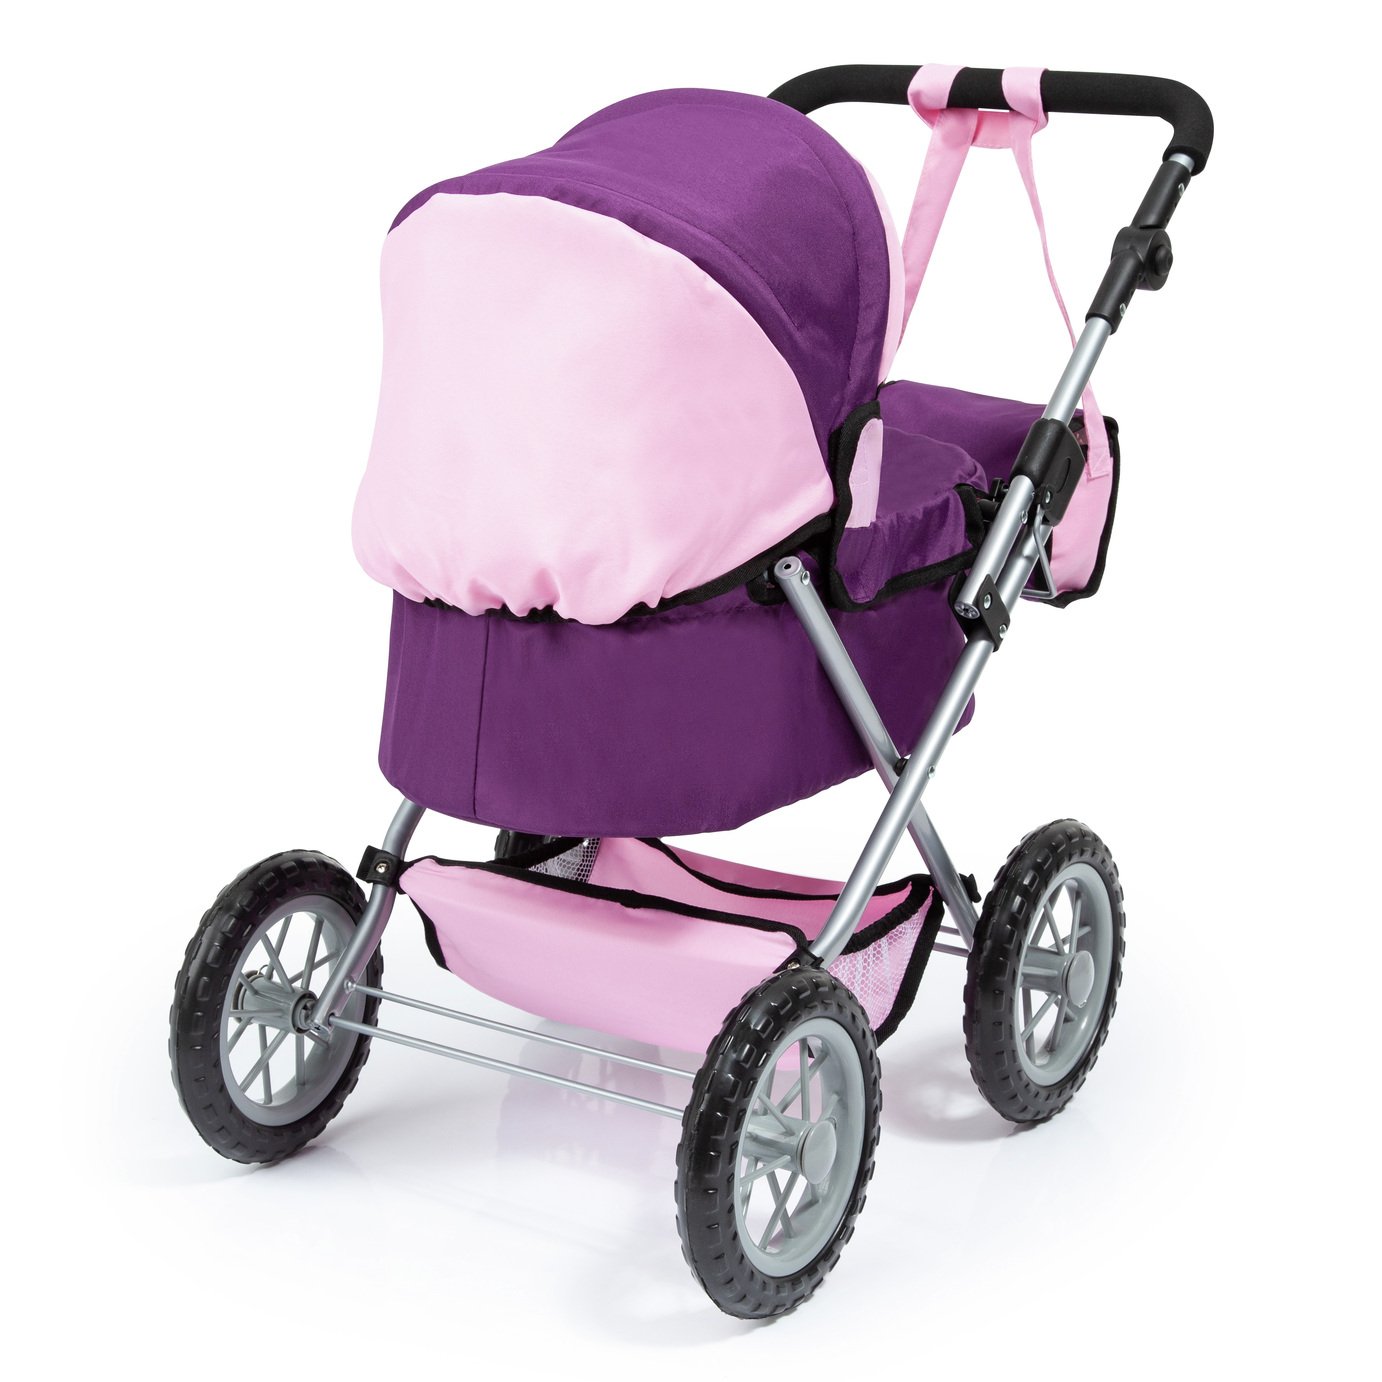 first dolls pram for 1 year old